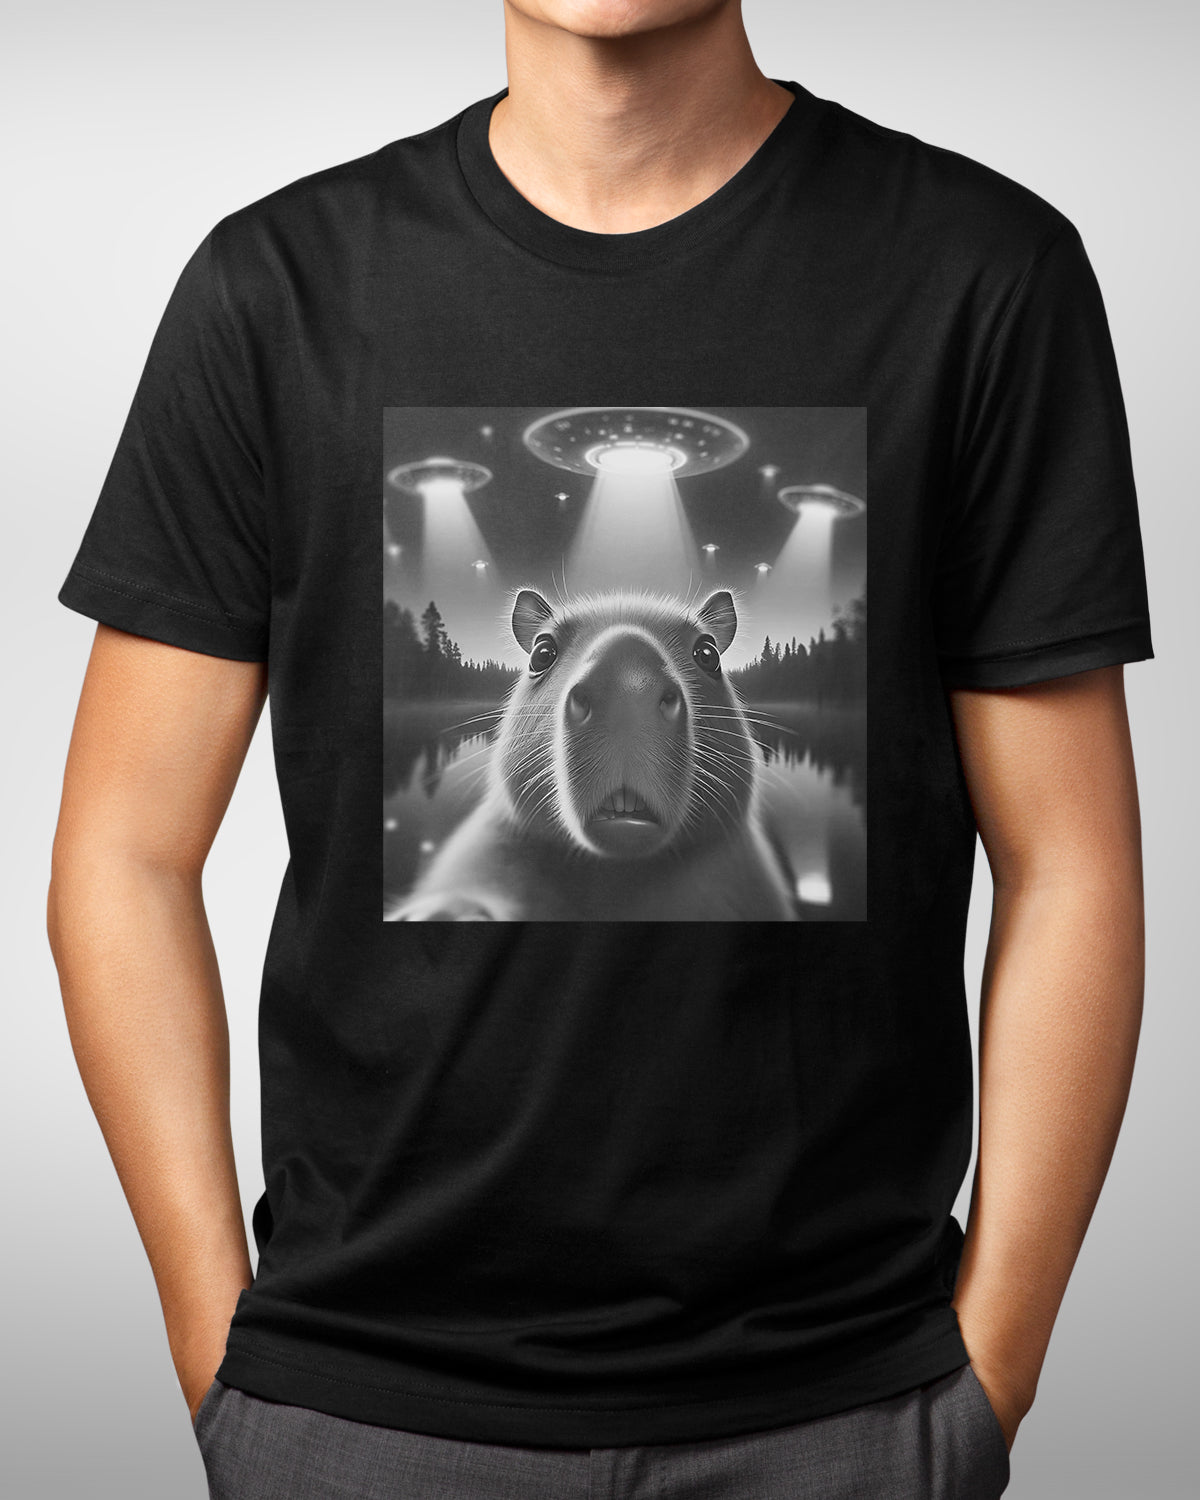 Capybara UFO Selfie Shirt- Retro Alien Saucer Design, Perfect for Camping & Space Enthusiasts